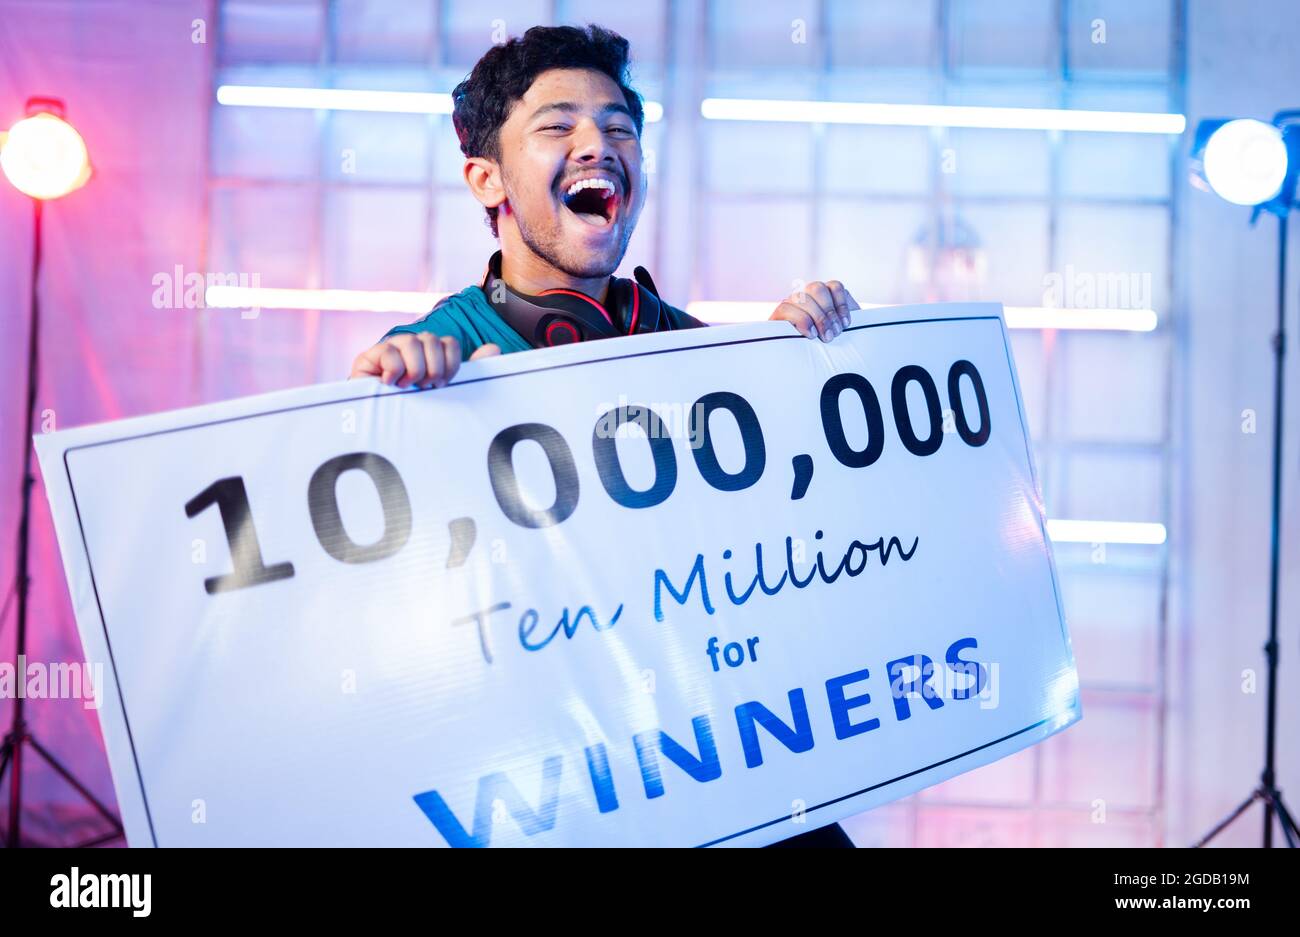 Excited Professional esports gamer with headphones celebrating and dancing by holding winners price money presentation at video gaming tournament on Stock Photo